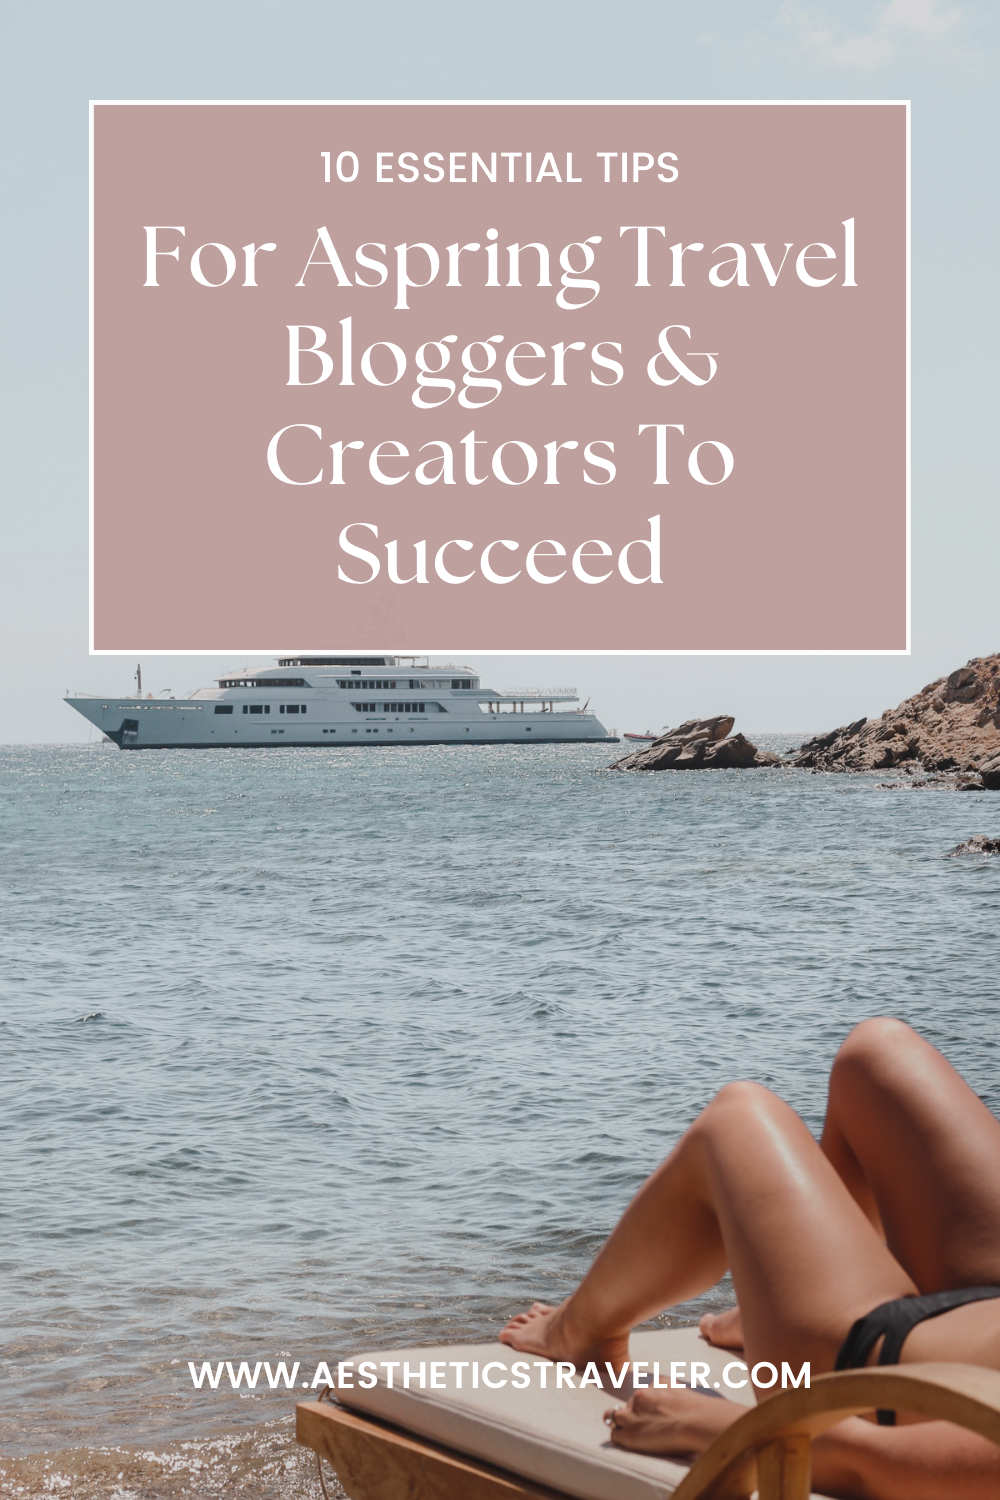 10 Essential Tips for Aspiring Travel Bloggers & Creators | www.aestheticstraveler.com Your go-to resource for travel blogging tips and tricks from a 10-year travel blogger and influencer marketing professional IG: @aestheticstraveler_